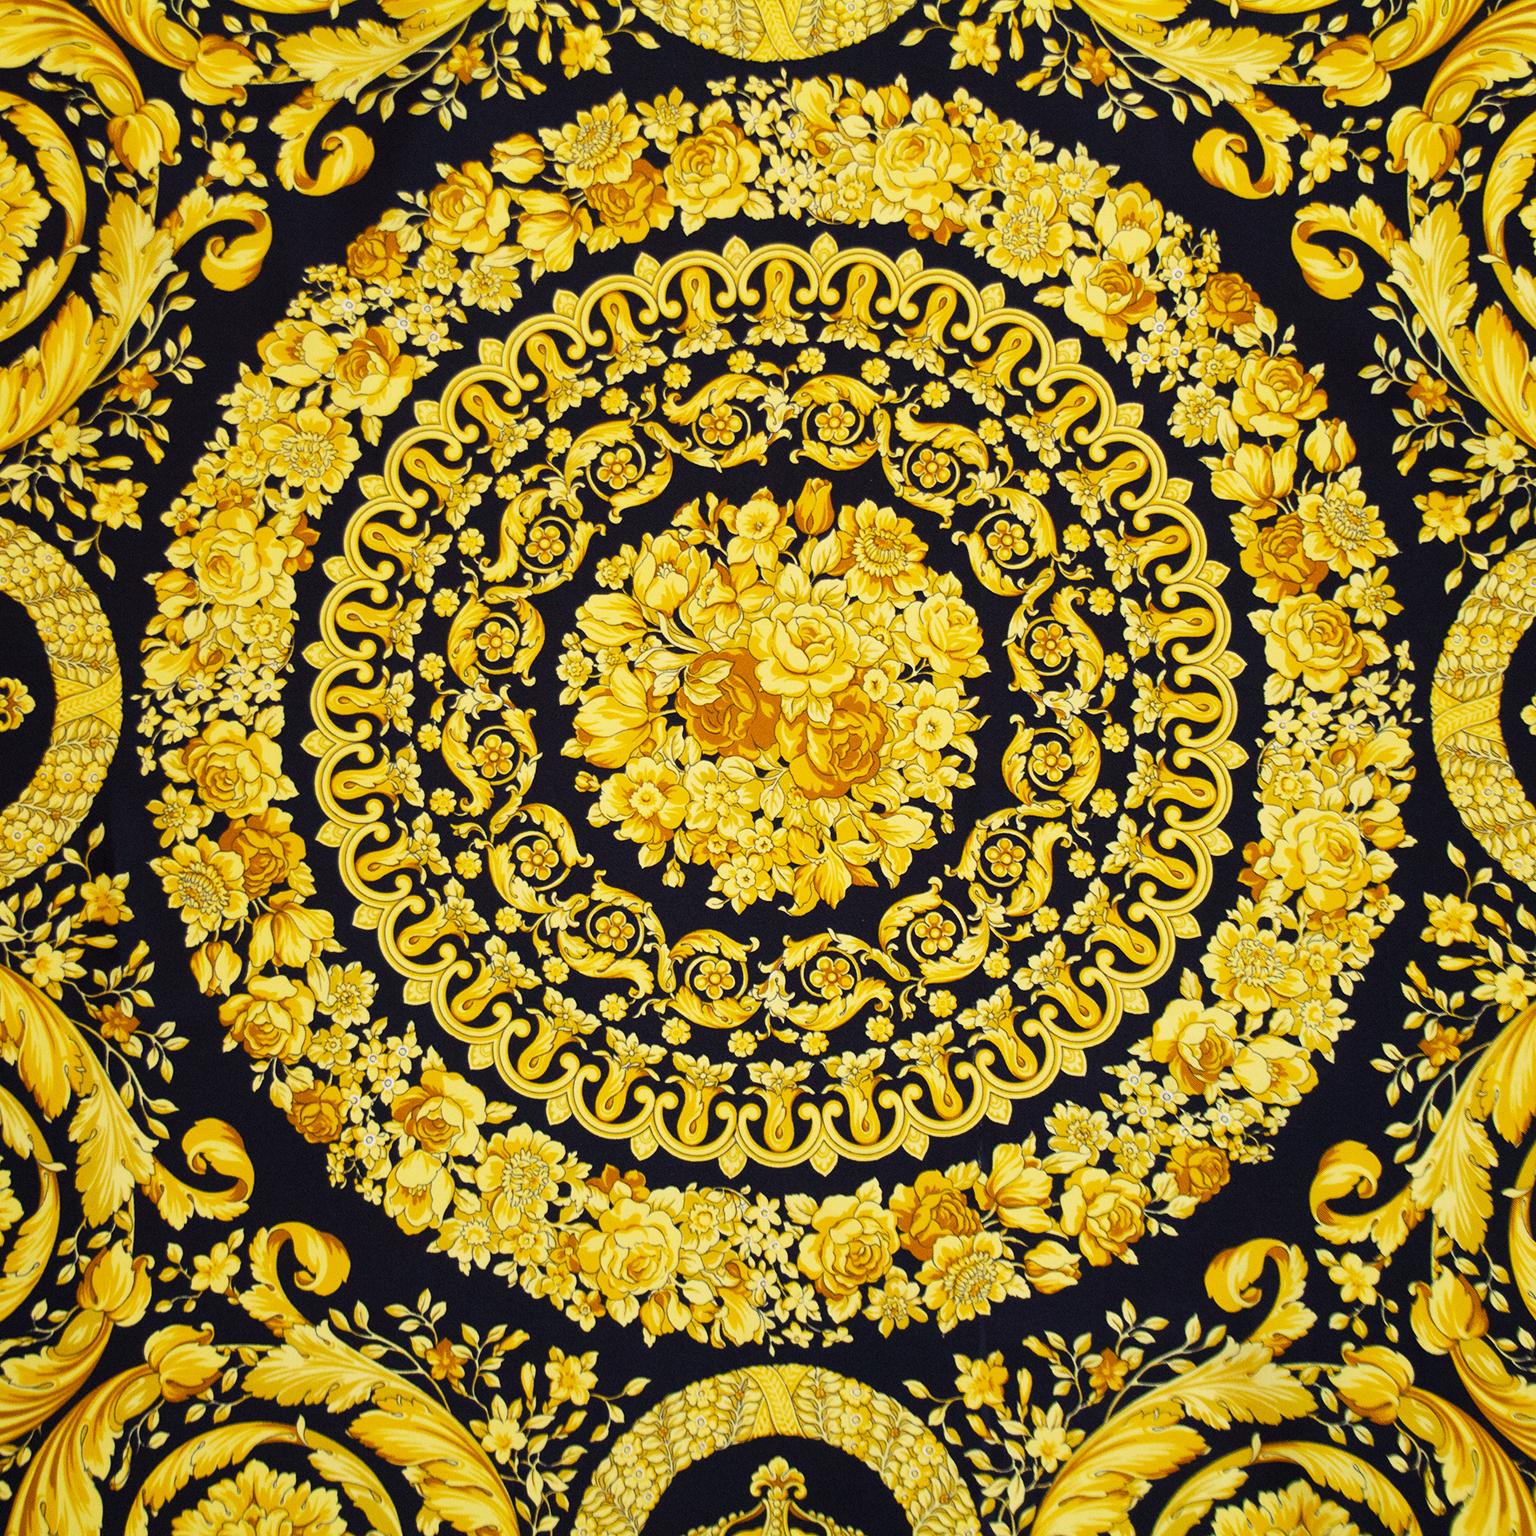 1990s Gianni Versace Black and Gold Baroque Silk Scarf at 1stDibs